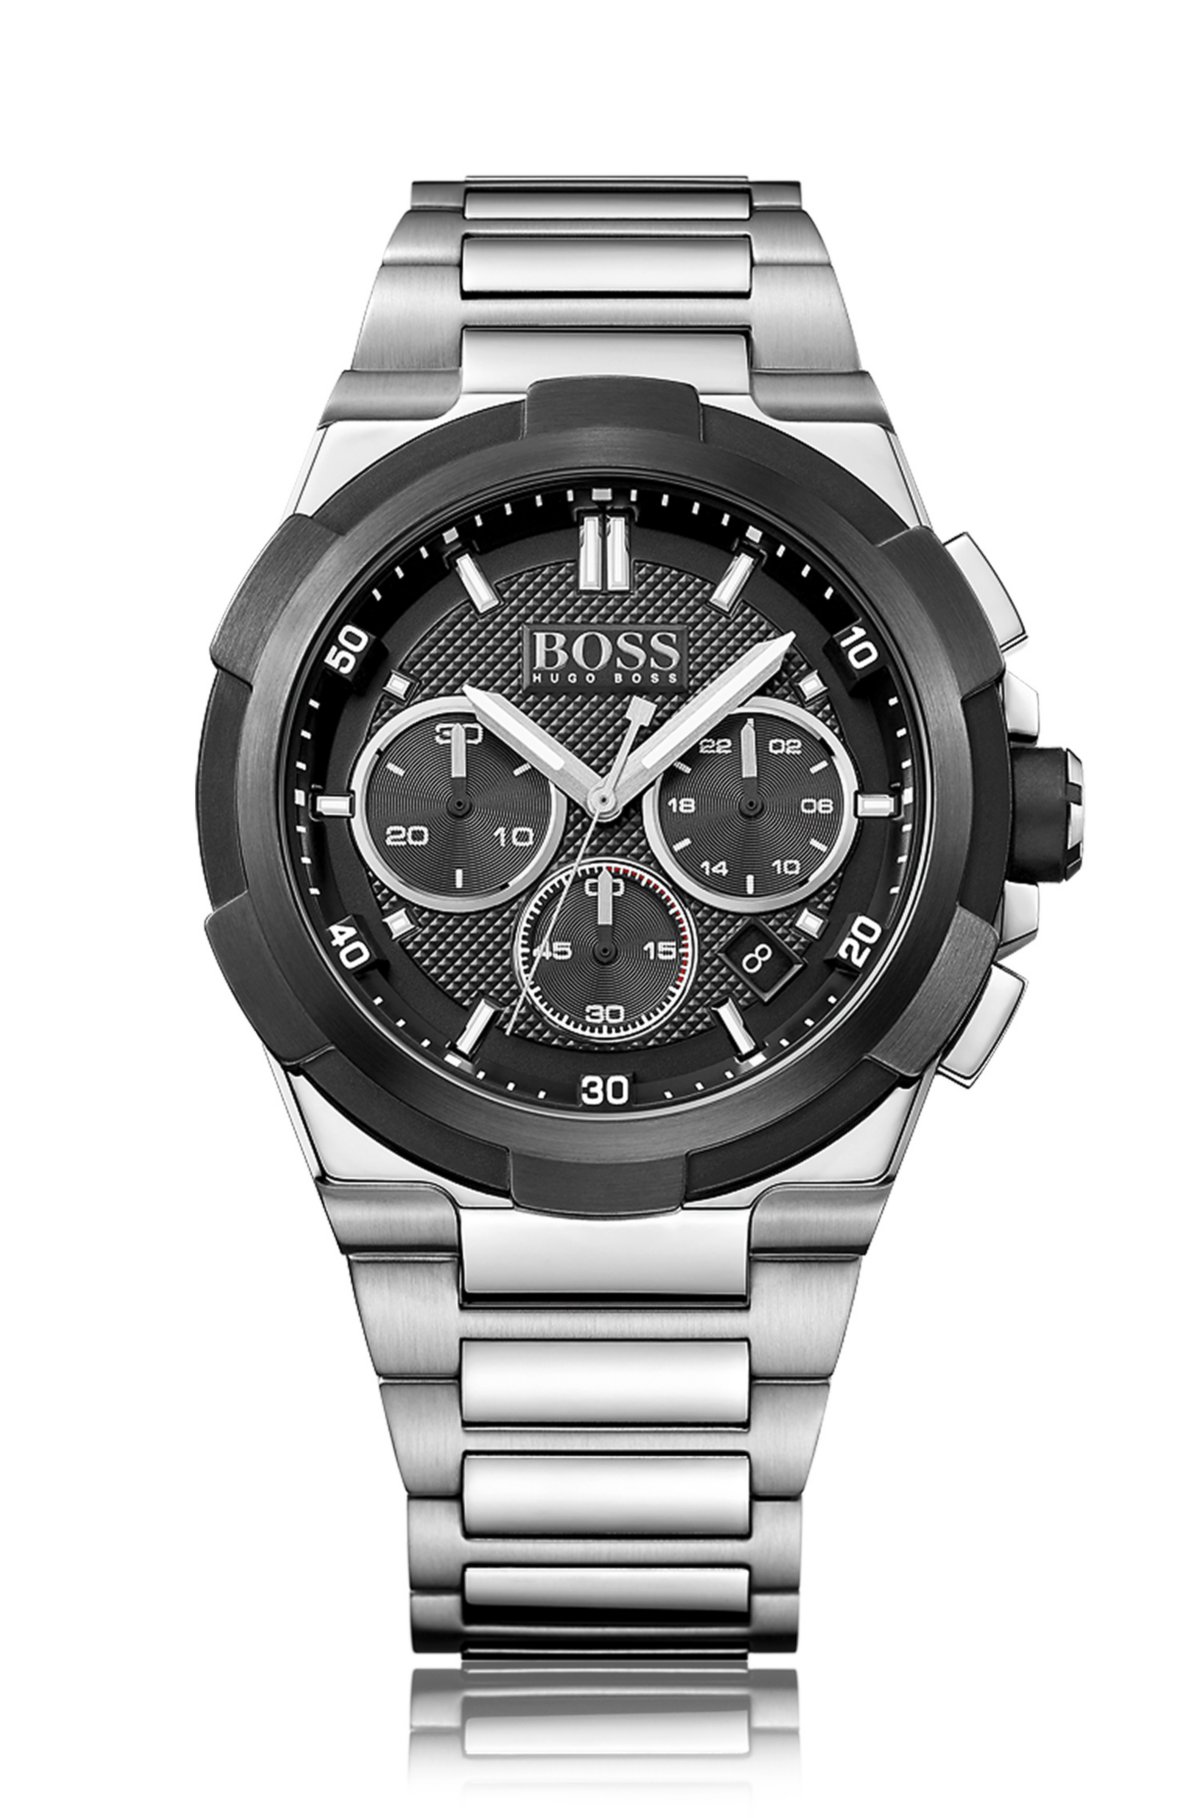 BOSS - Stainless Steel | Chronograph Watch 1513359